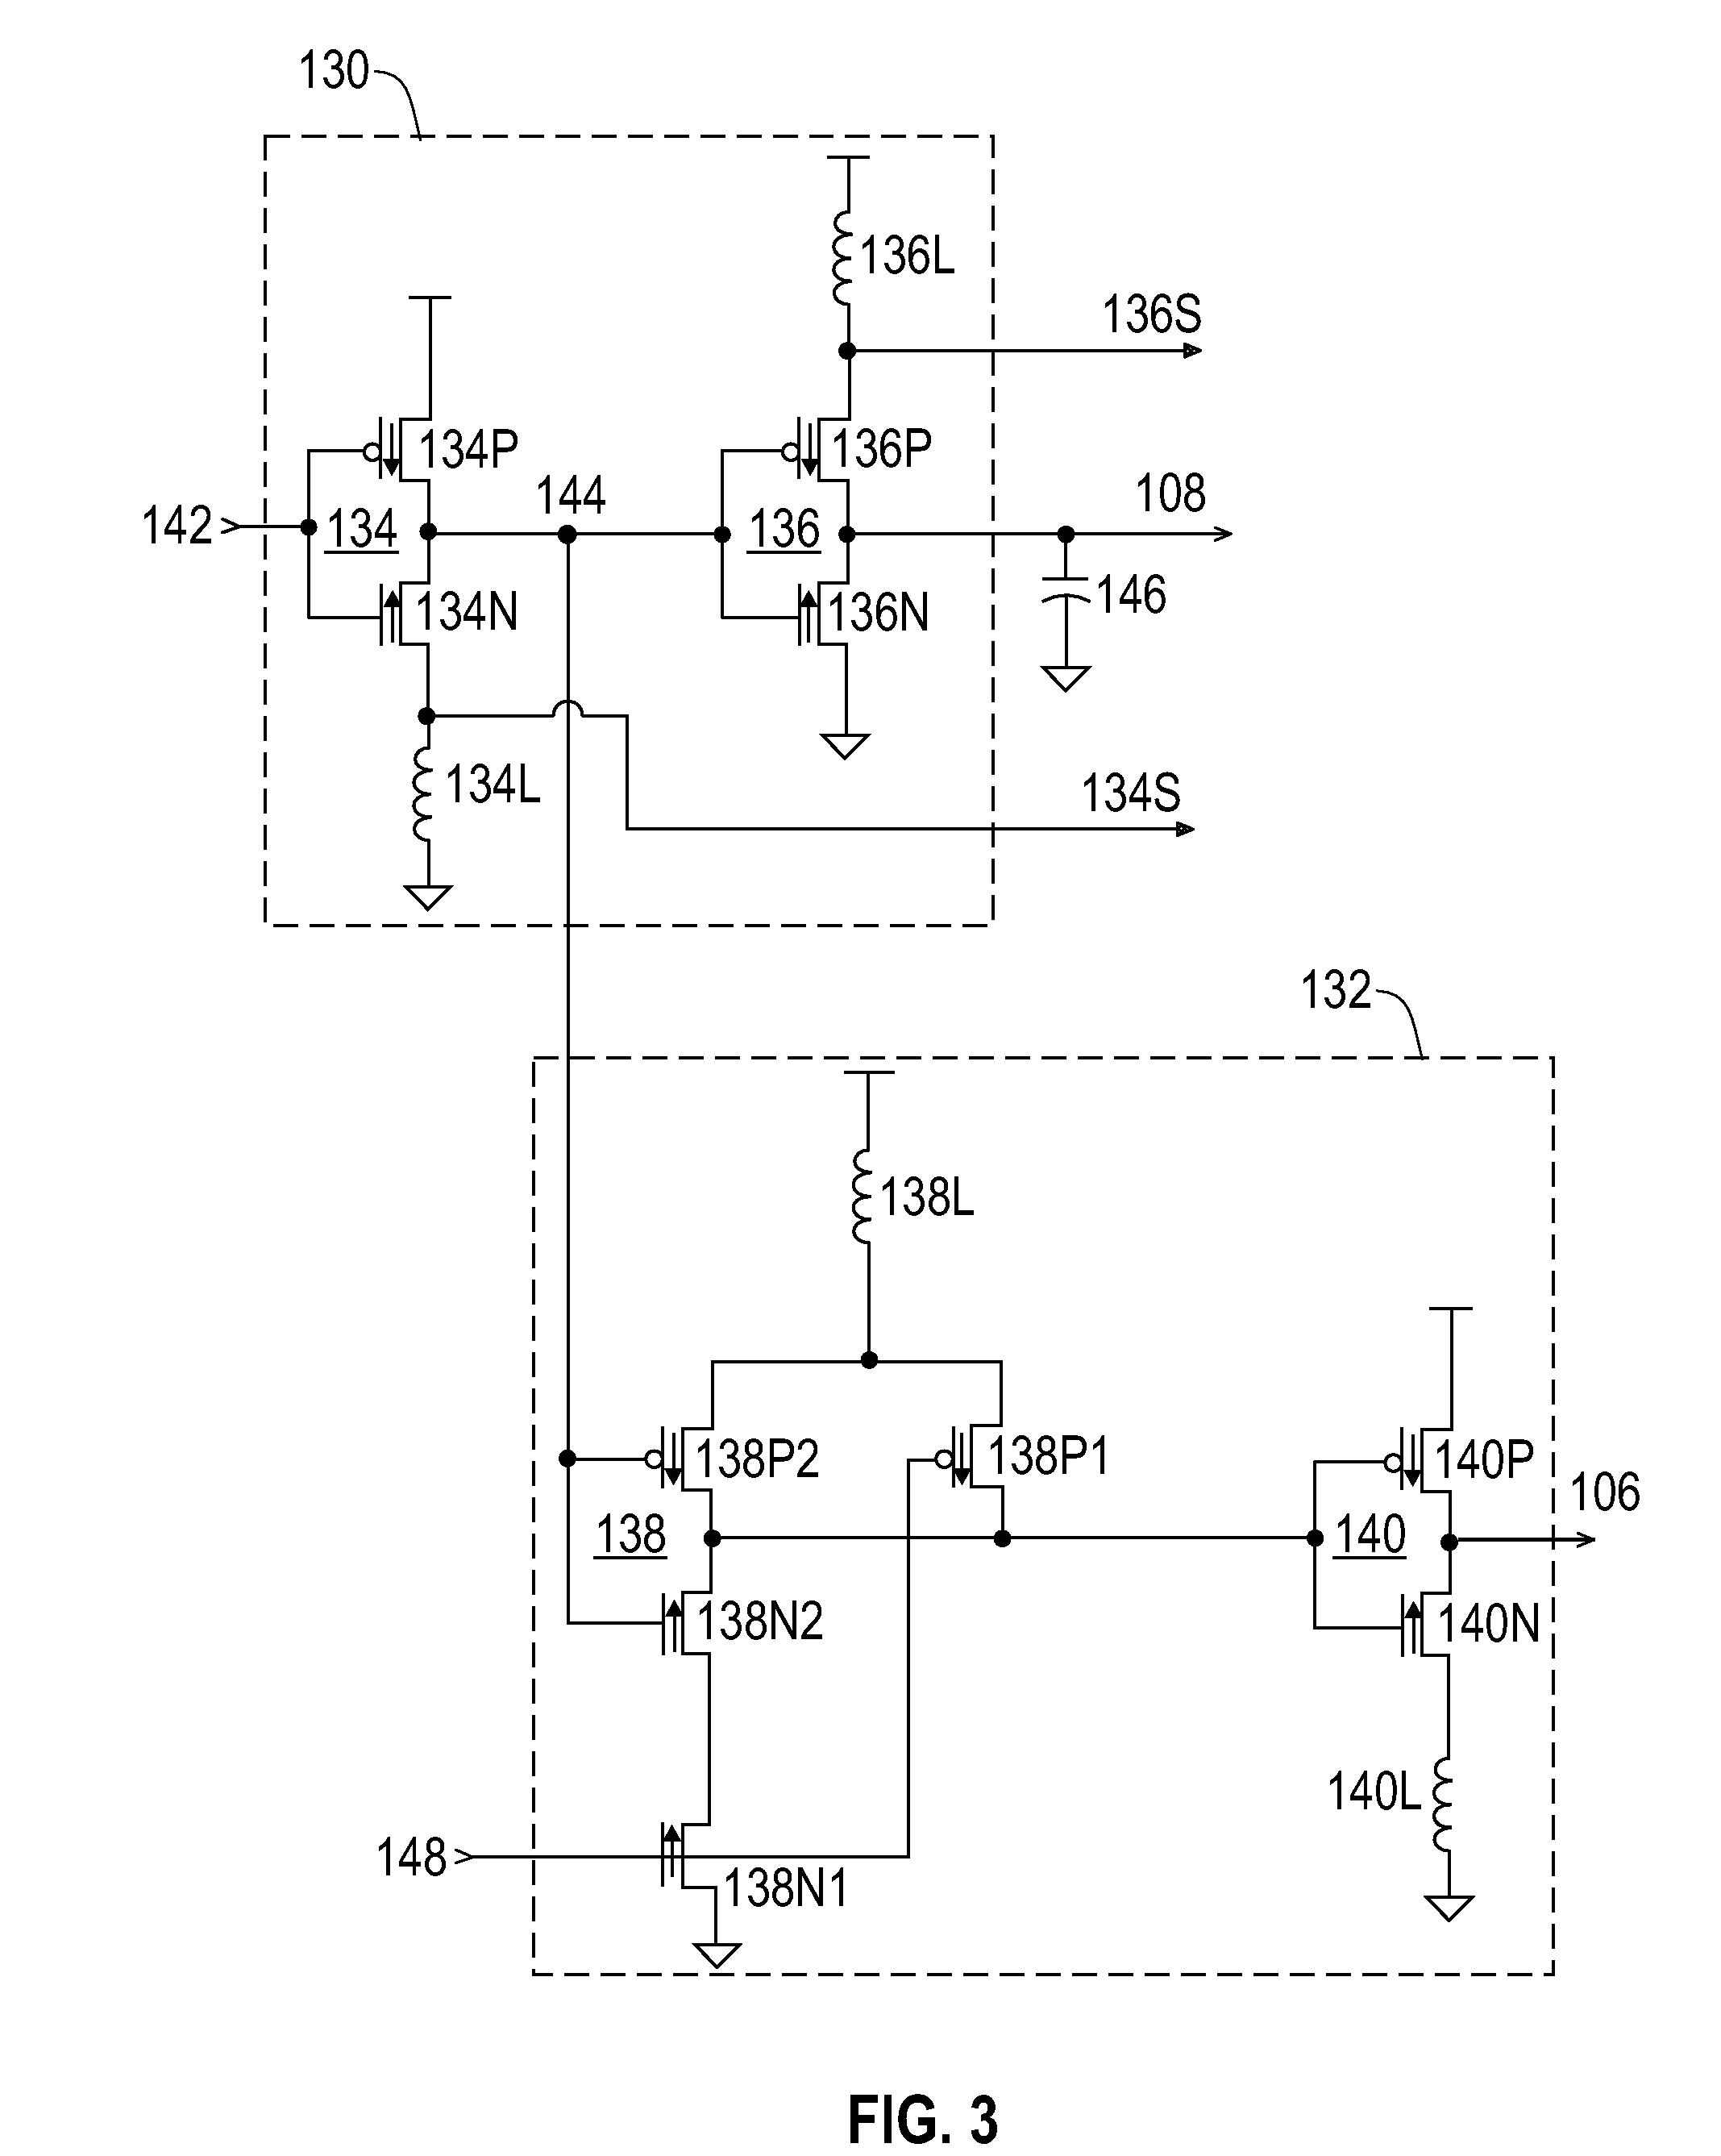 Local clock buffer (LCB) with asymmetric inductive peaking